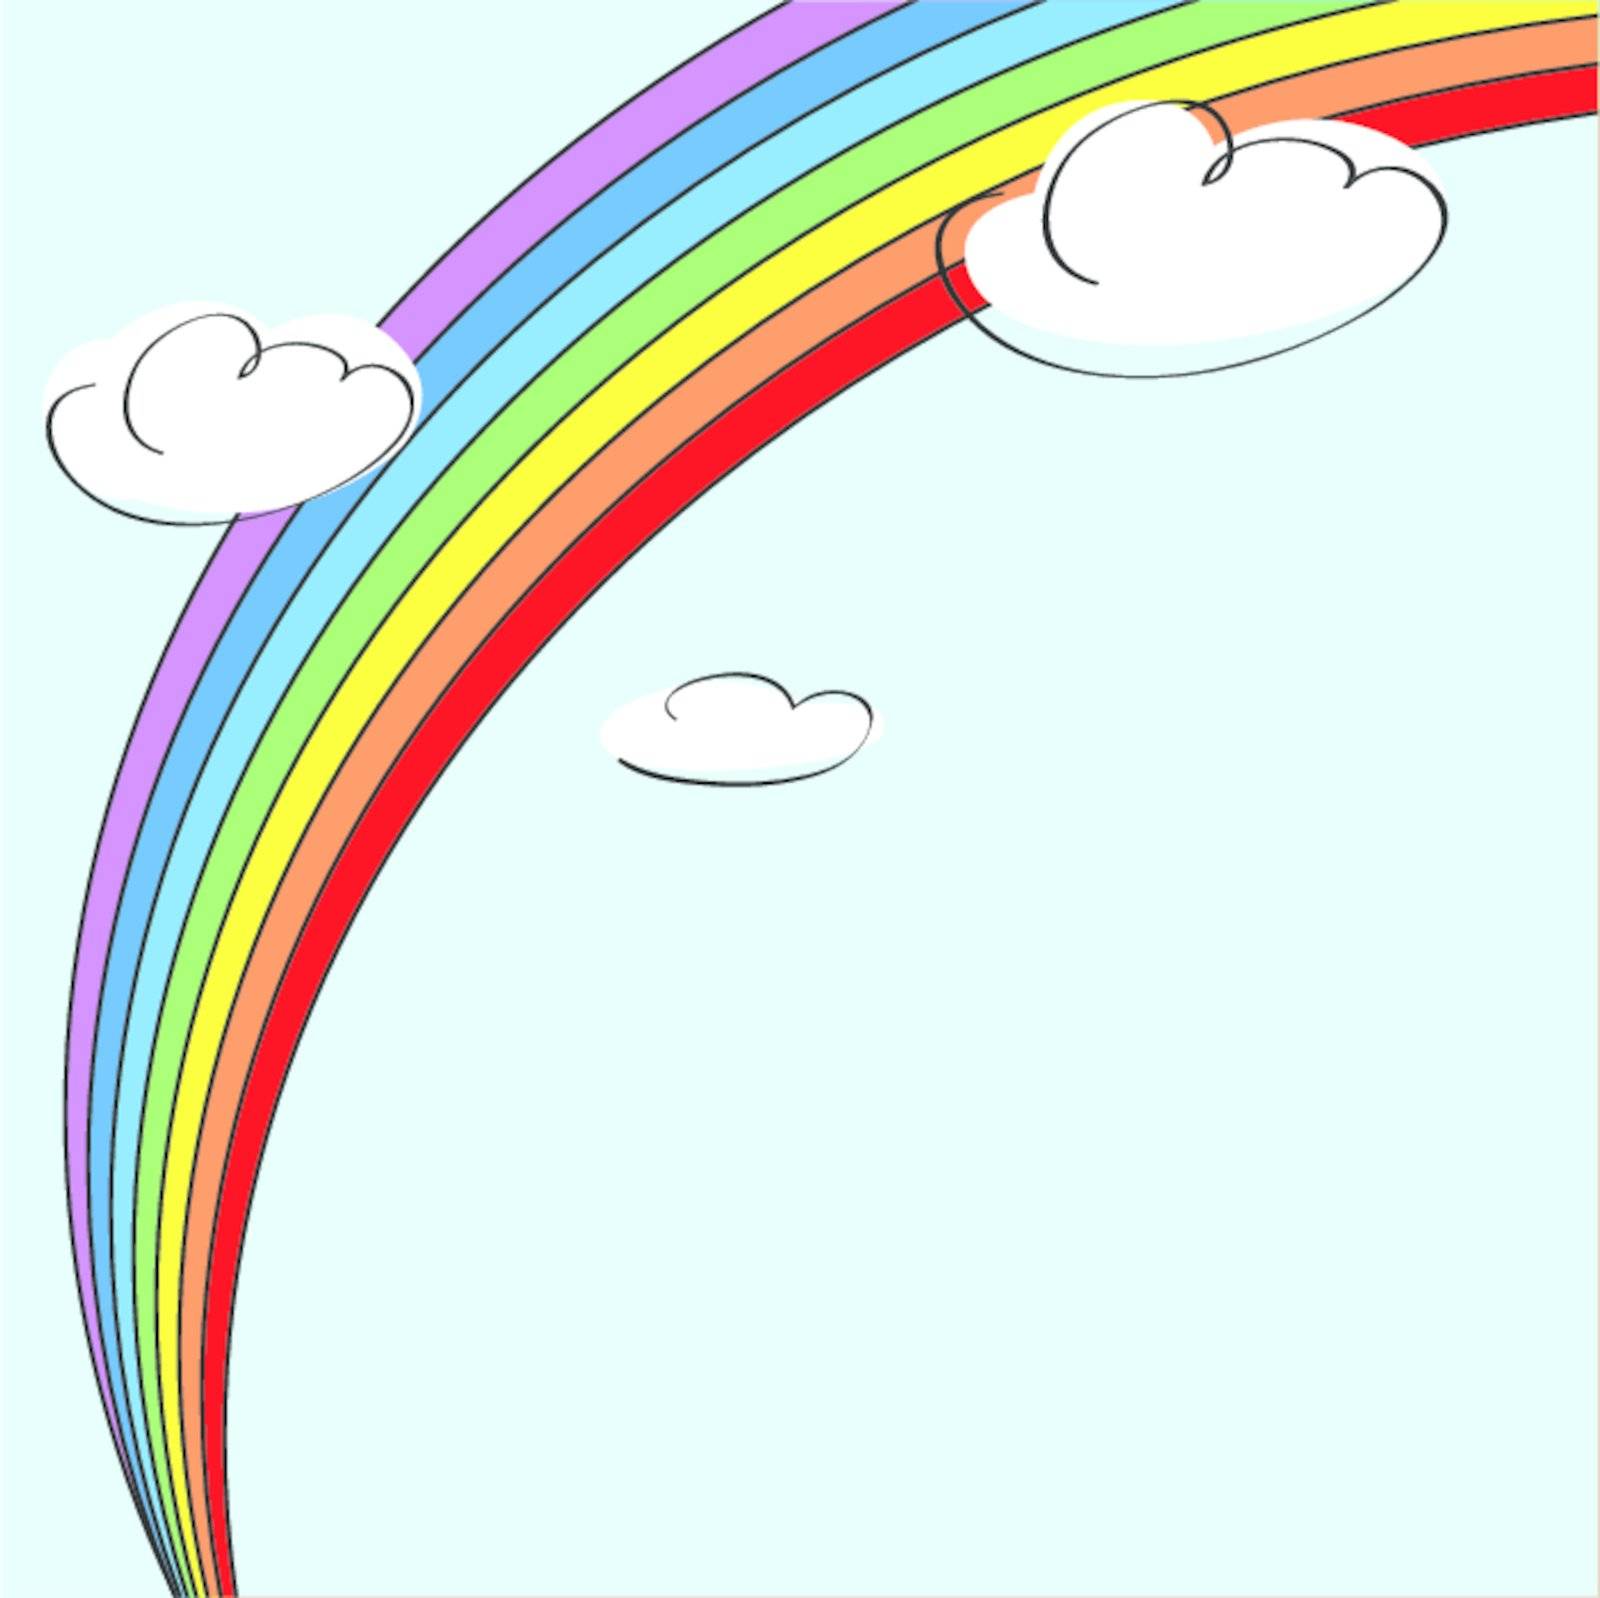 Rainbow and clouds background illustration